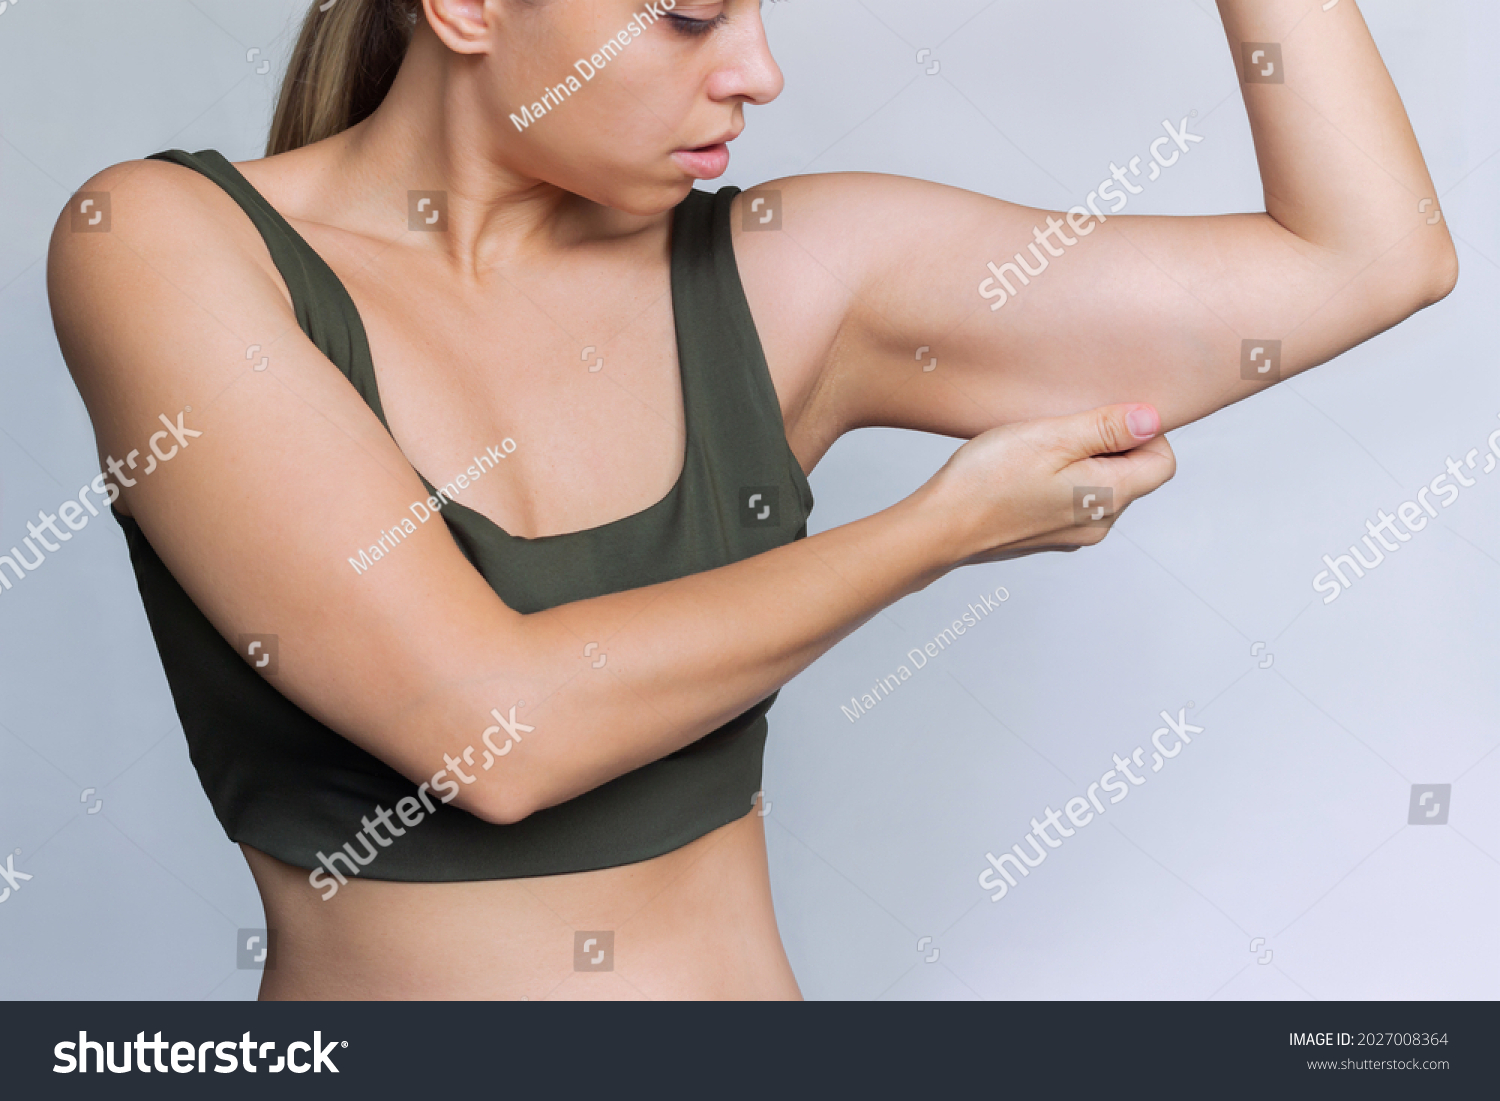 A young caucasian blonde woman  grabbing skin on her upper arm with excess fat isolated on a white background. Pinching the loose and saggy muscles. Overweight concept #2027008364